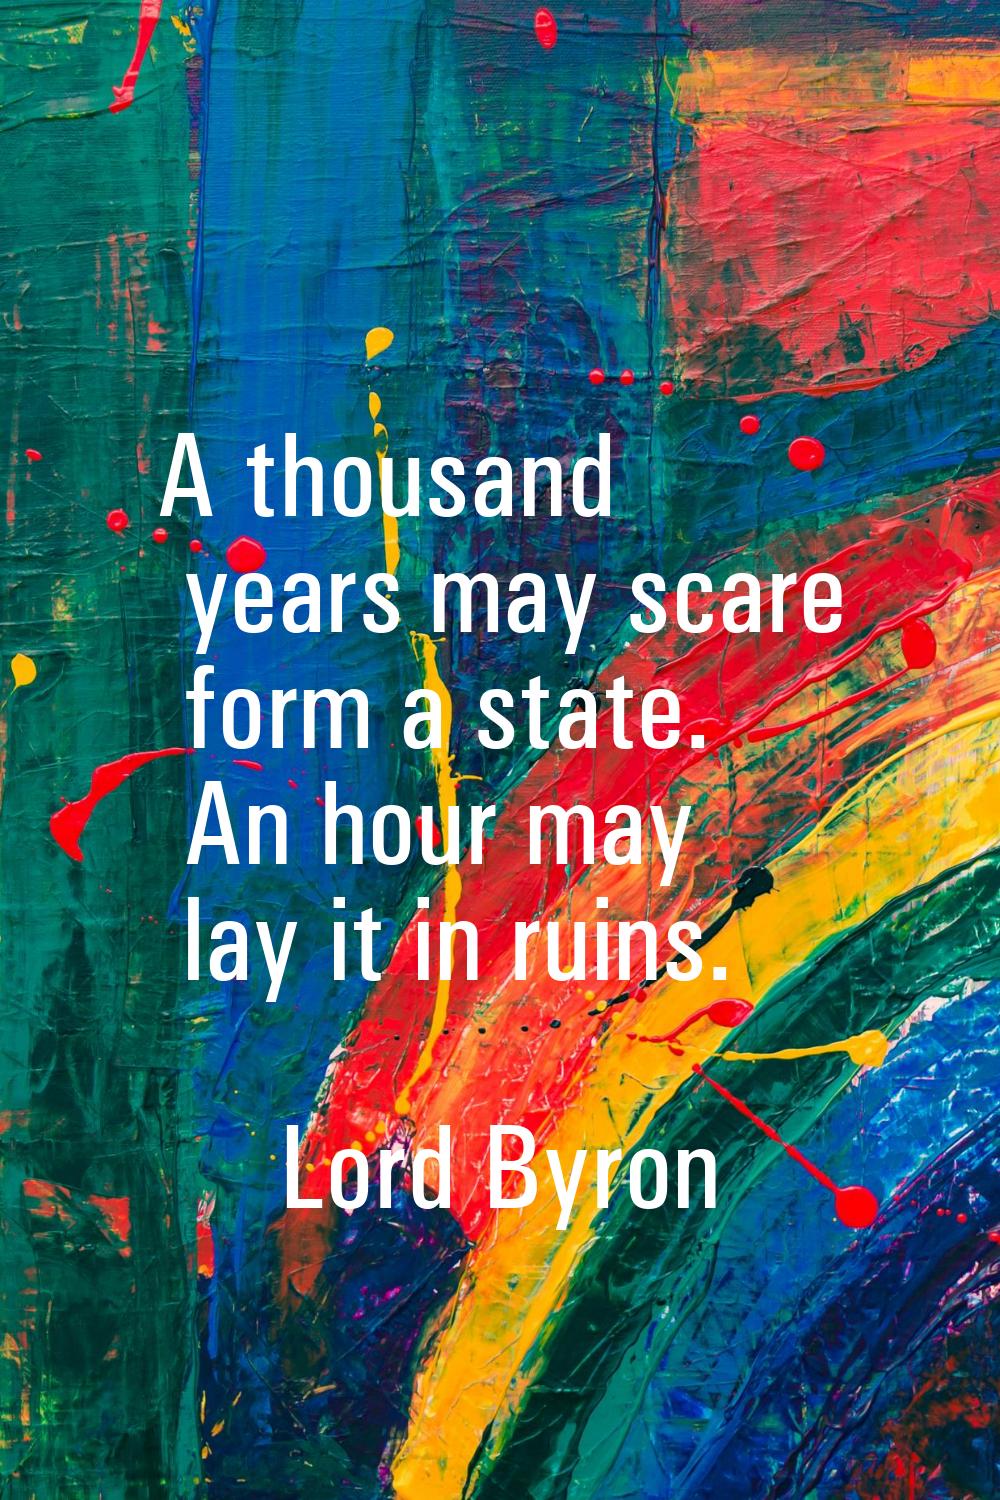 A thousand years may scare form a state. An hour may lay it in ruins.